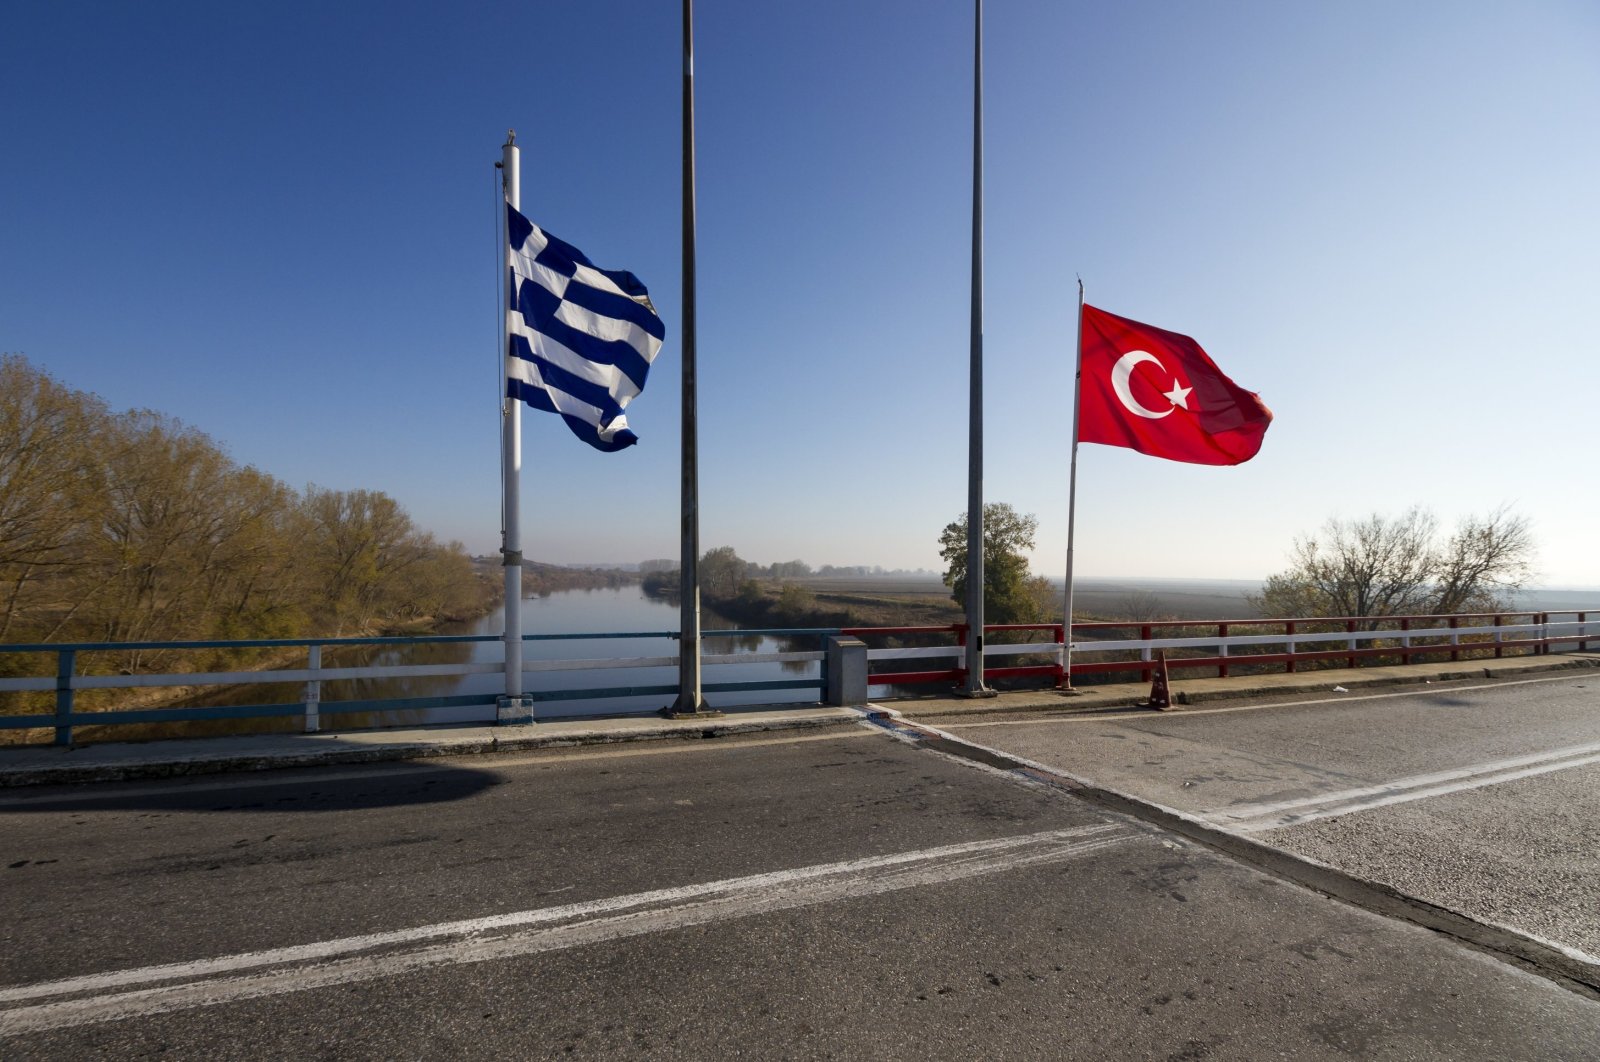 FETÖ members usually prefer the border with Greece to enter Europe, which has become a haven for the group after their failed coup attempt in 2016 in Turkey. (Shutterstock Photo)